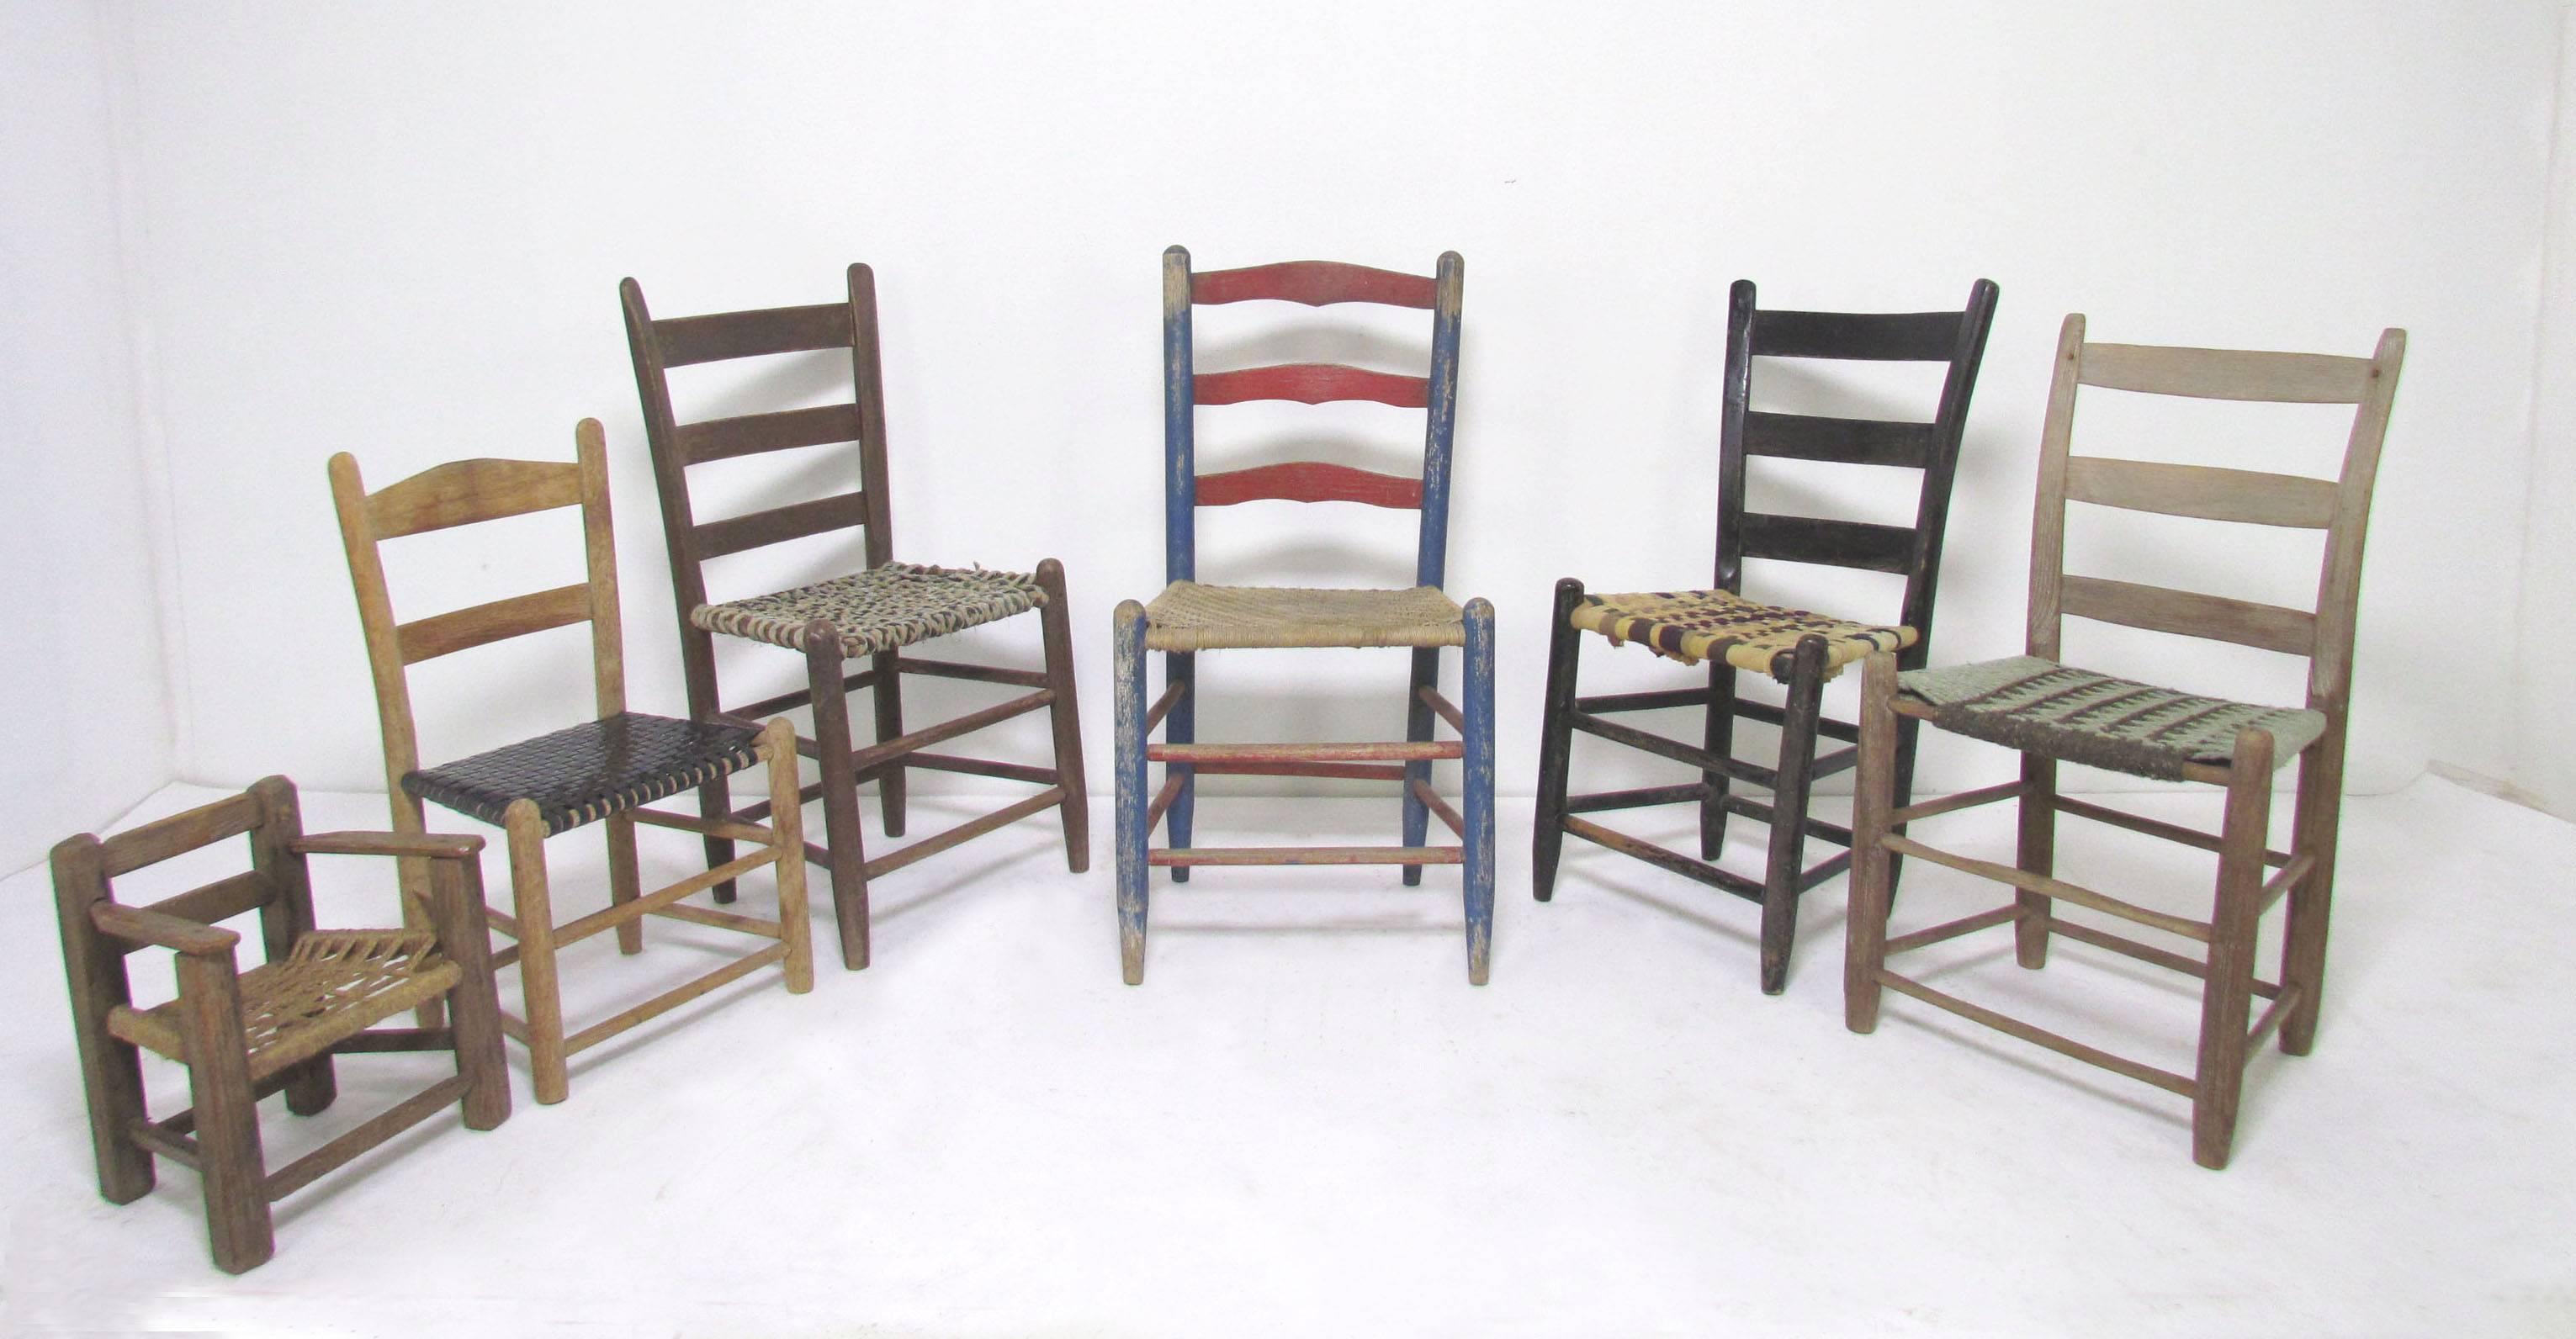 A charming collection of six Primitive 19th century Folk Art chairs in various sizes, and styles. Some in weathered wood, others in original old paint, with handwoven seats of fabric and various fibers. Each a singular work of art.

Largest